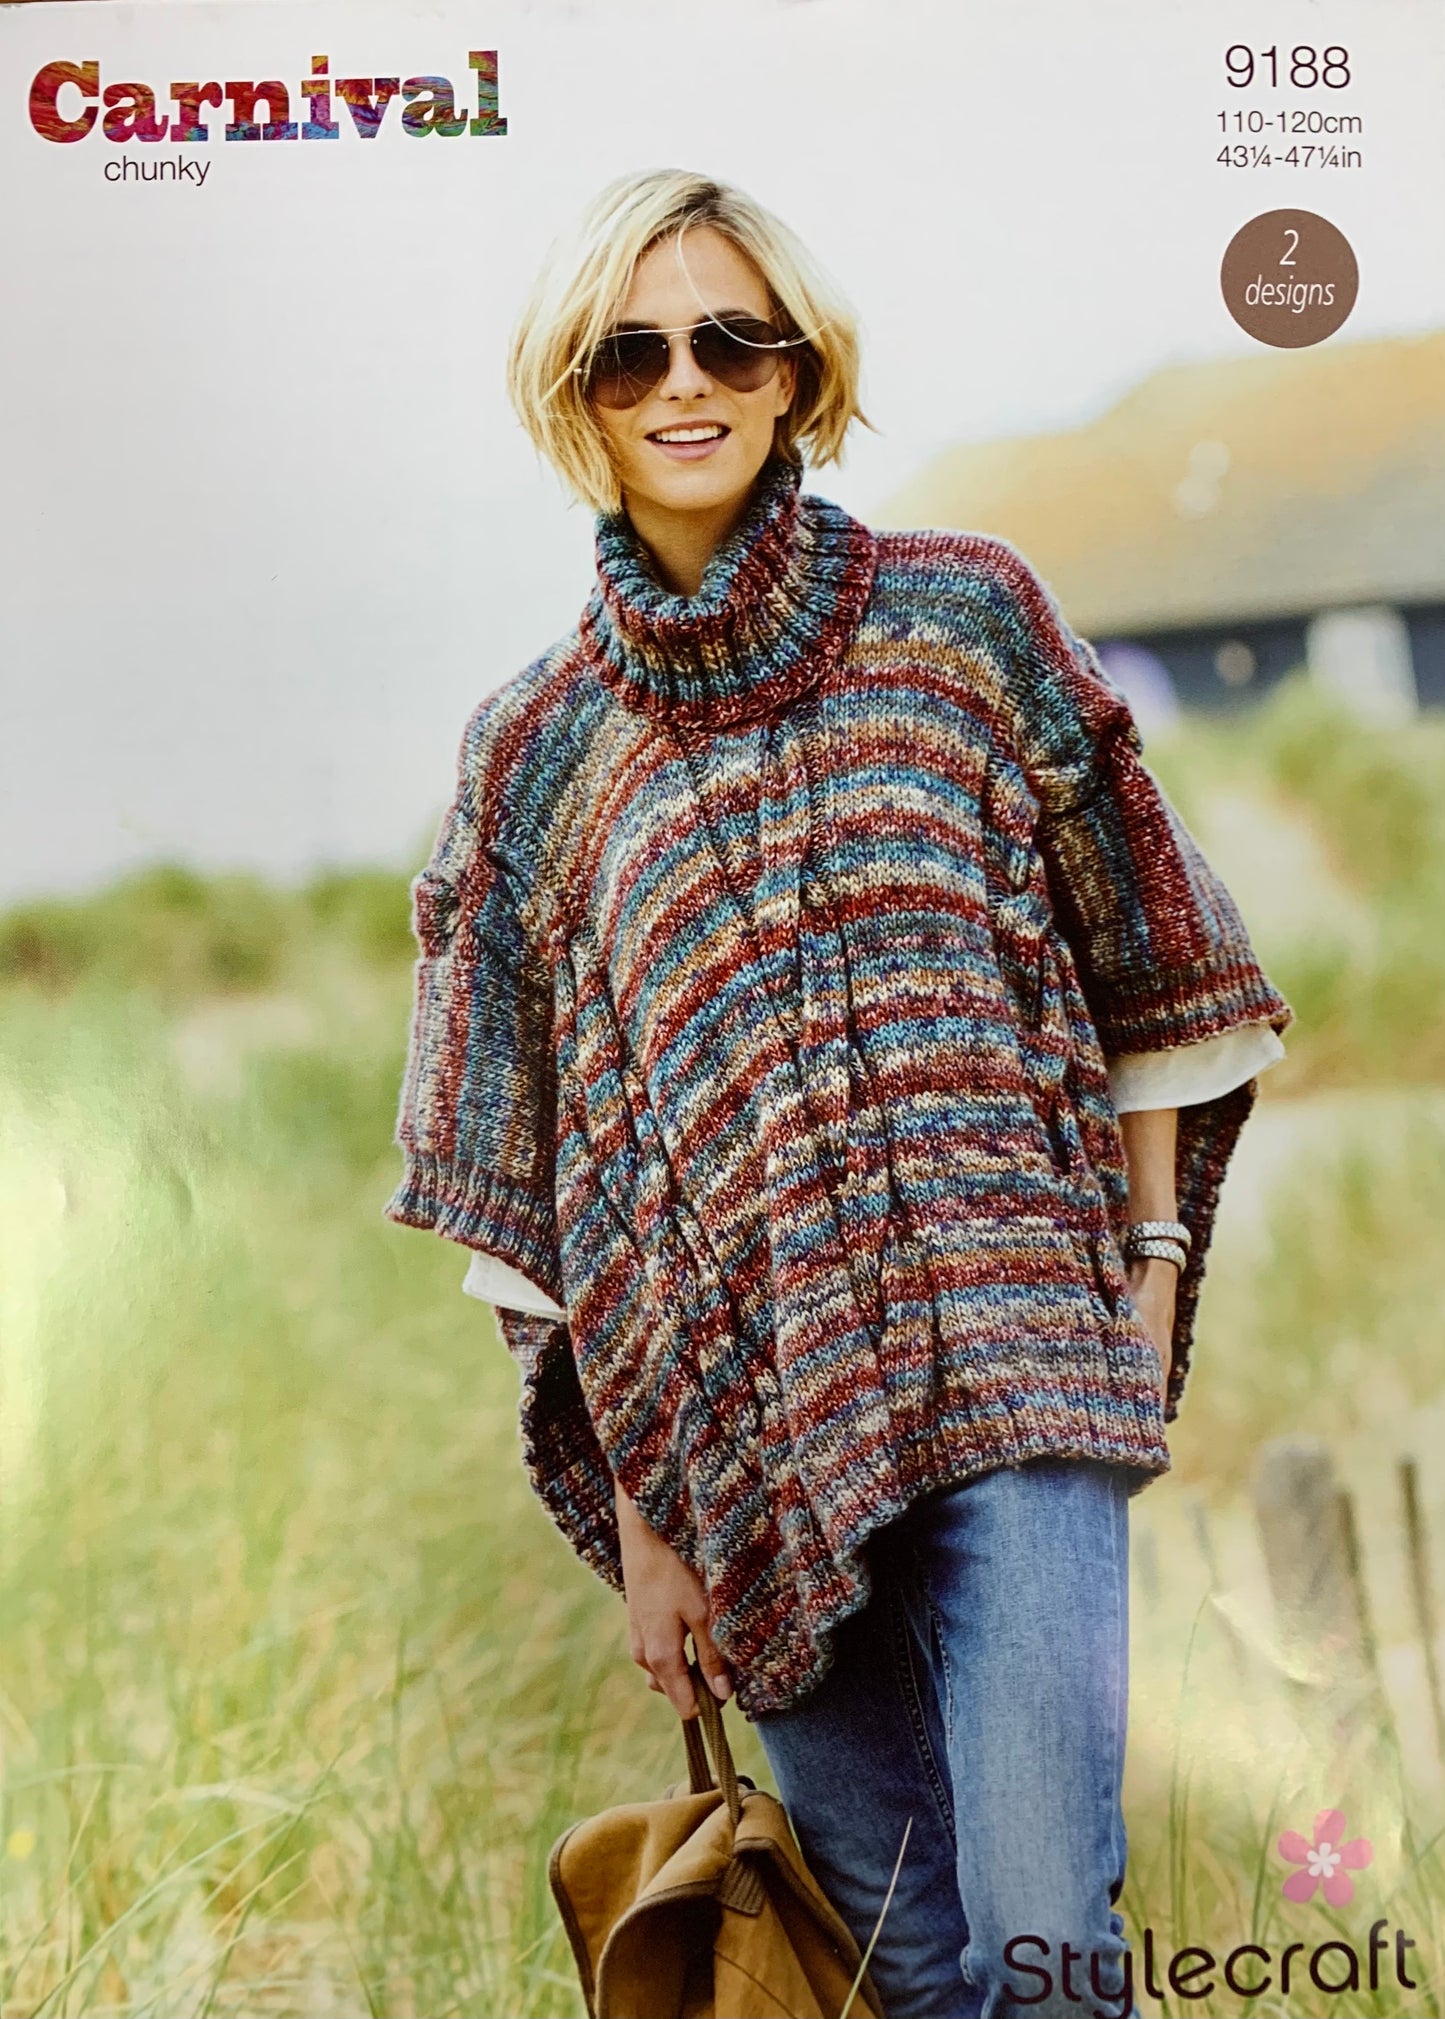 9188 Stylecraft Carnival chunky ladies poncho round and cowl neck knitting pattern